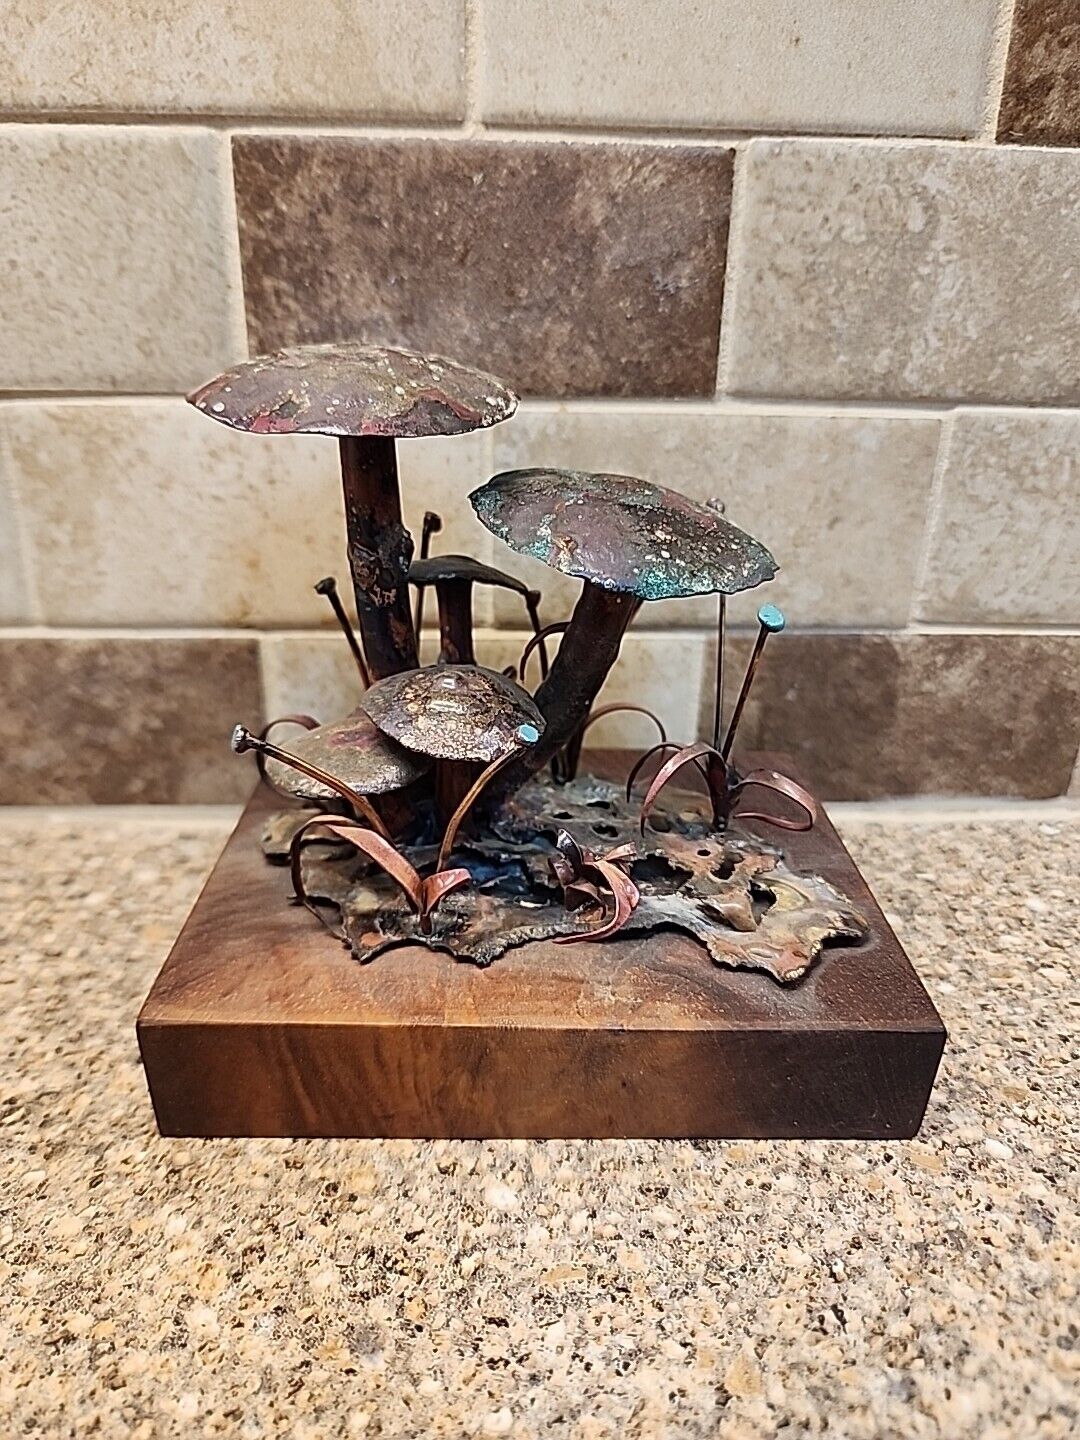 Vintage Hand Crafted Copper Mushrooms Sculpture With Wood Base Unique Unusual